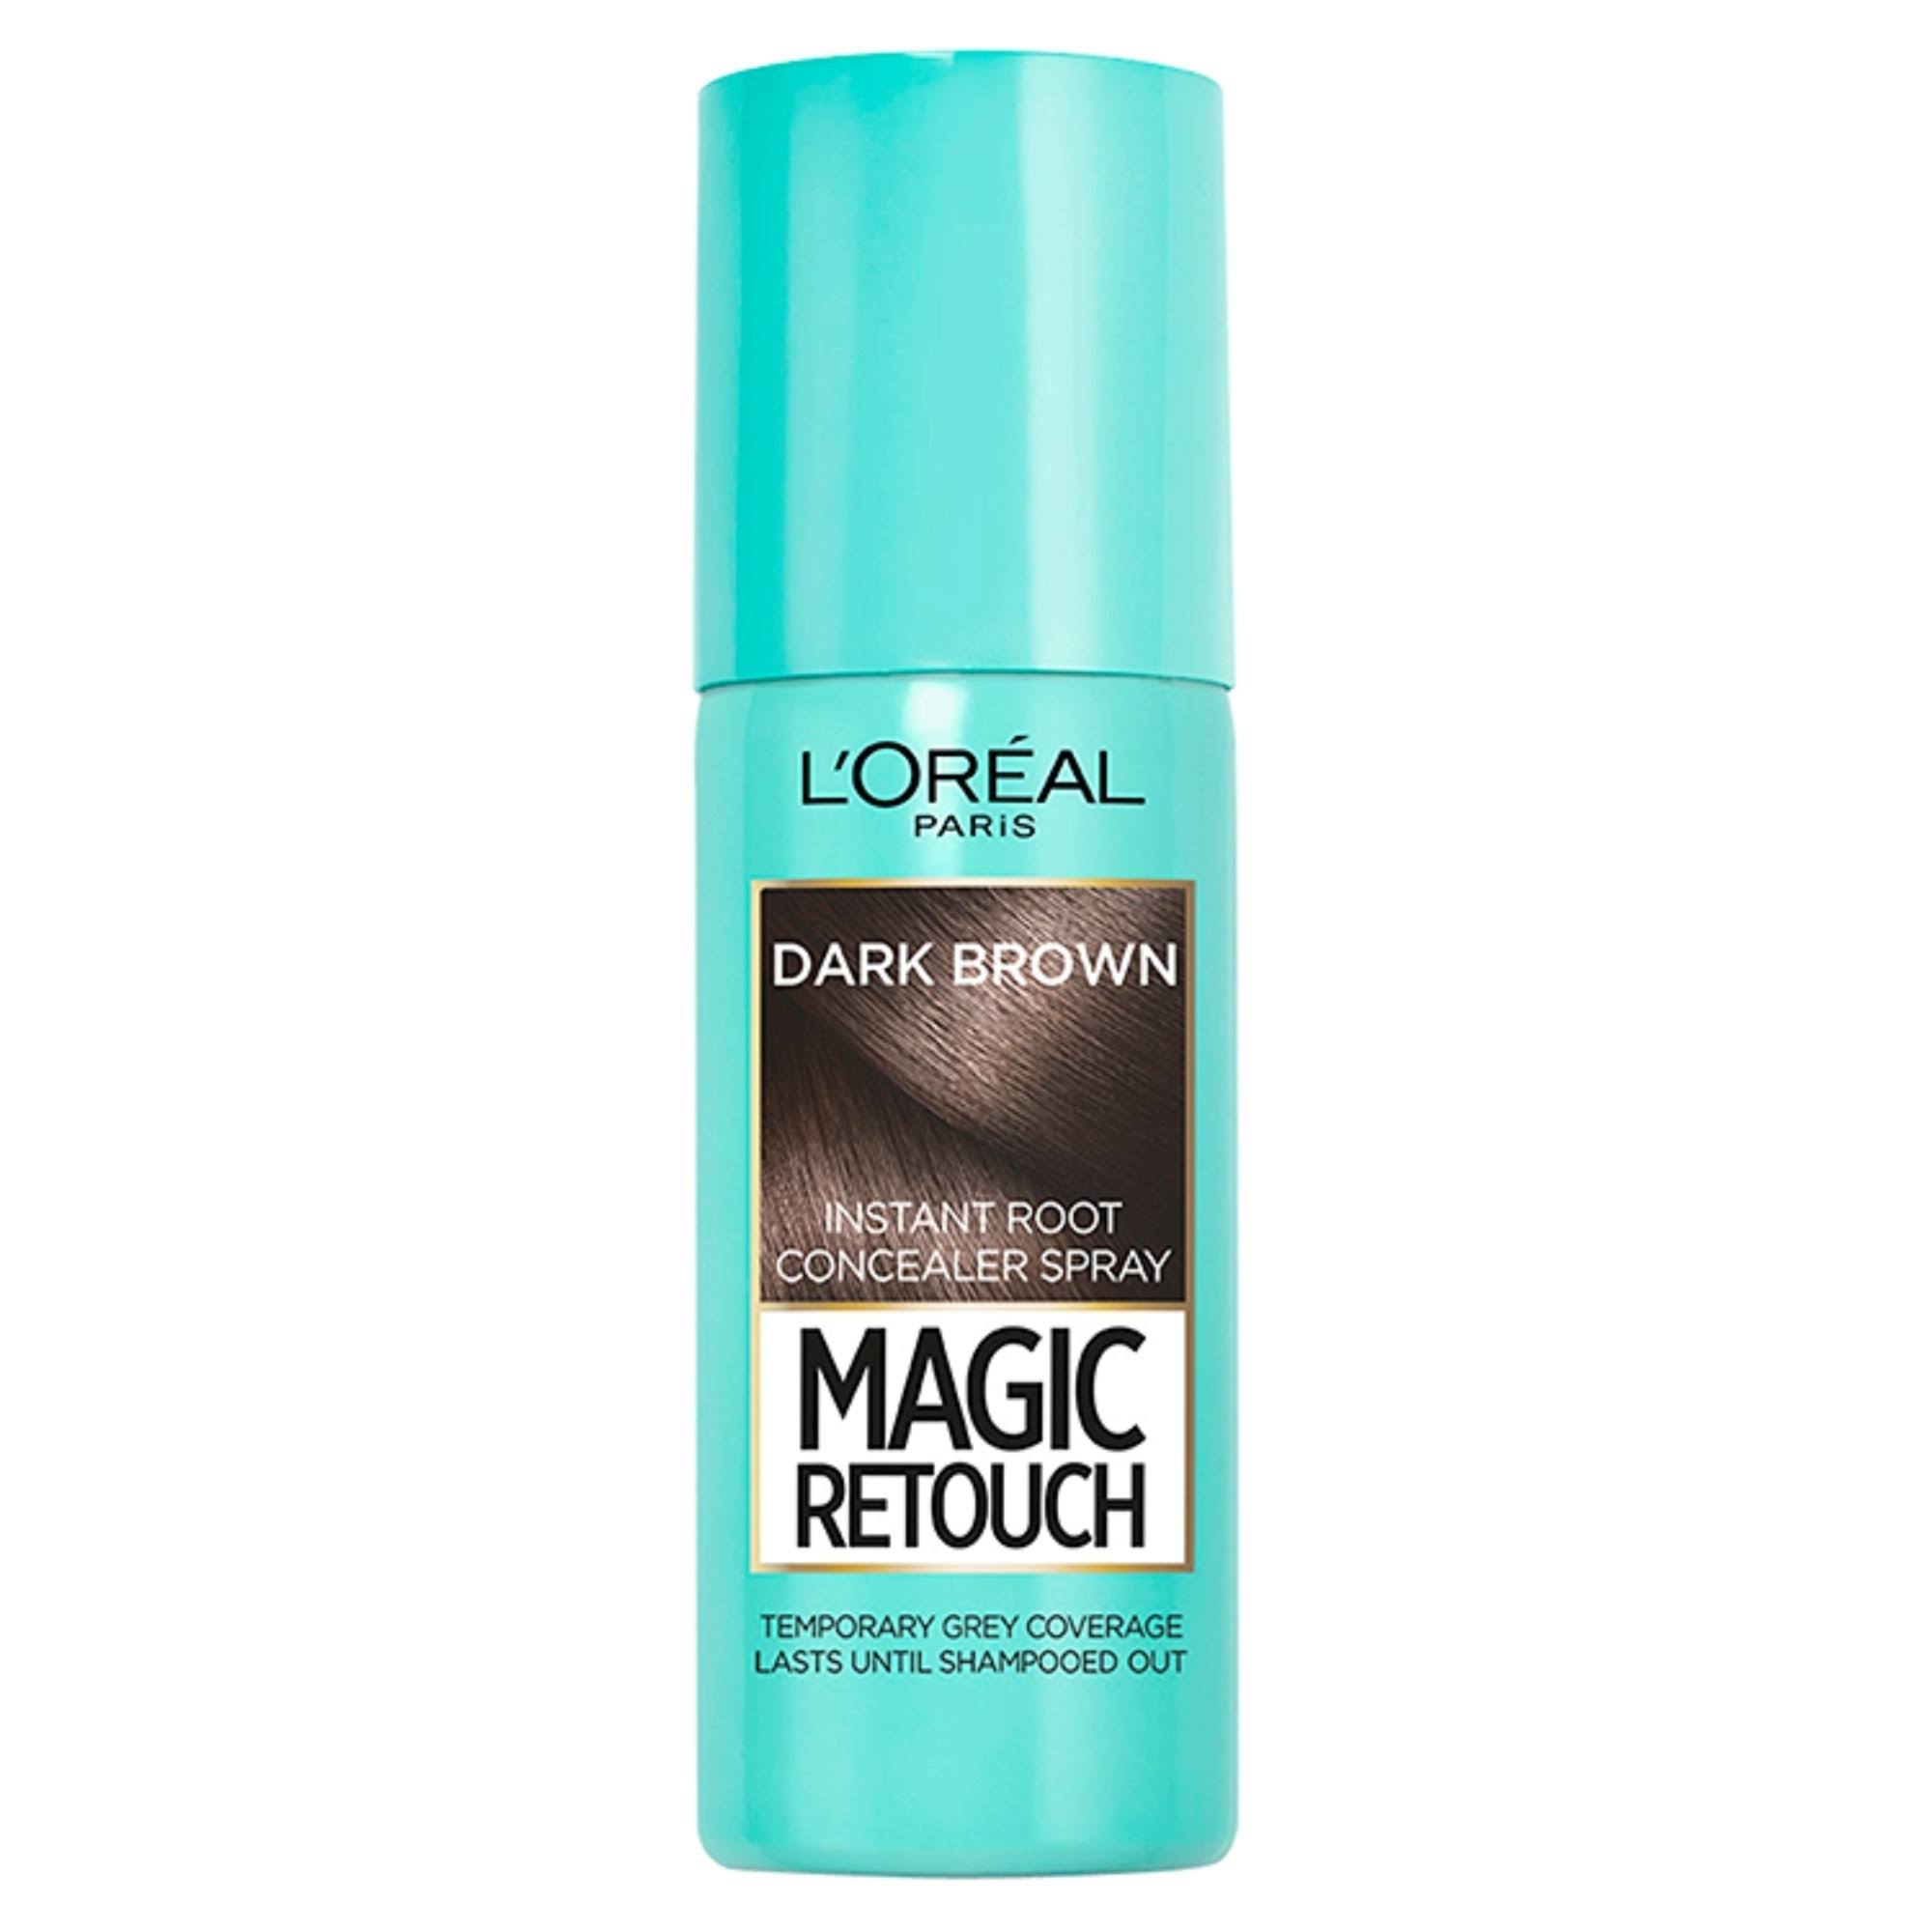 L'Oreal Magic Retouch Dark Brown Instant Root Concealer Spray 75 ml